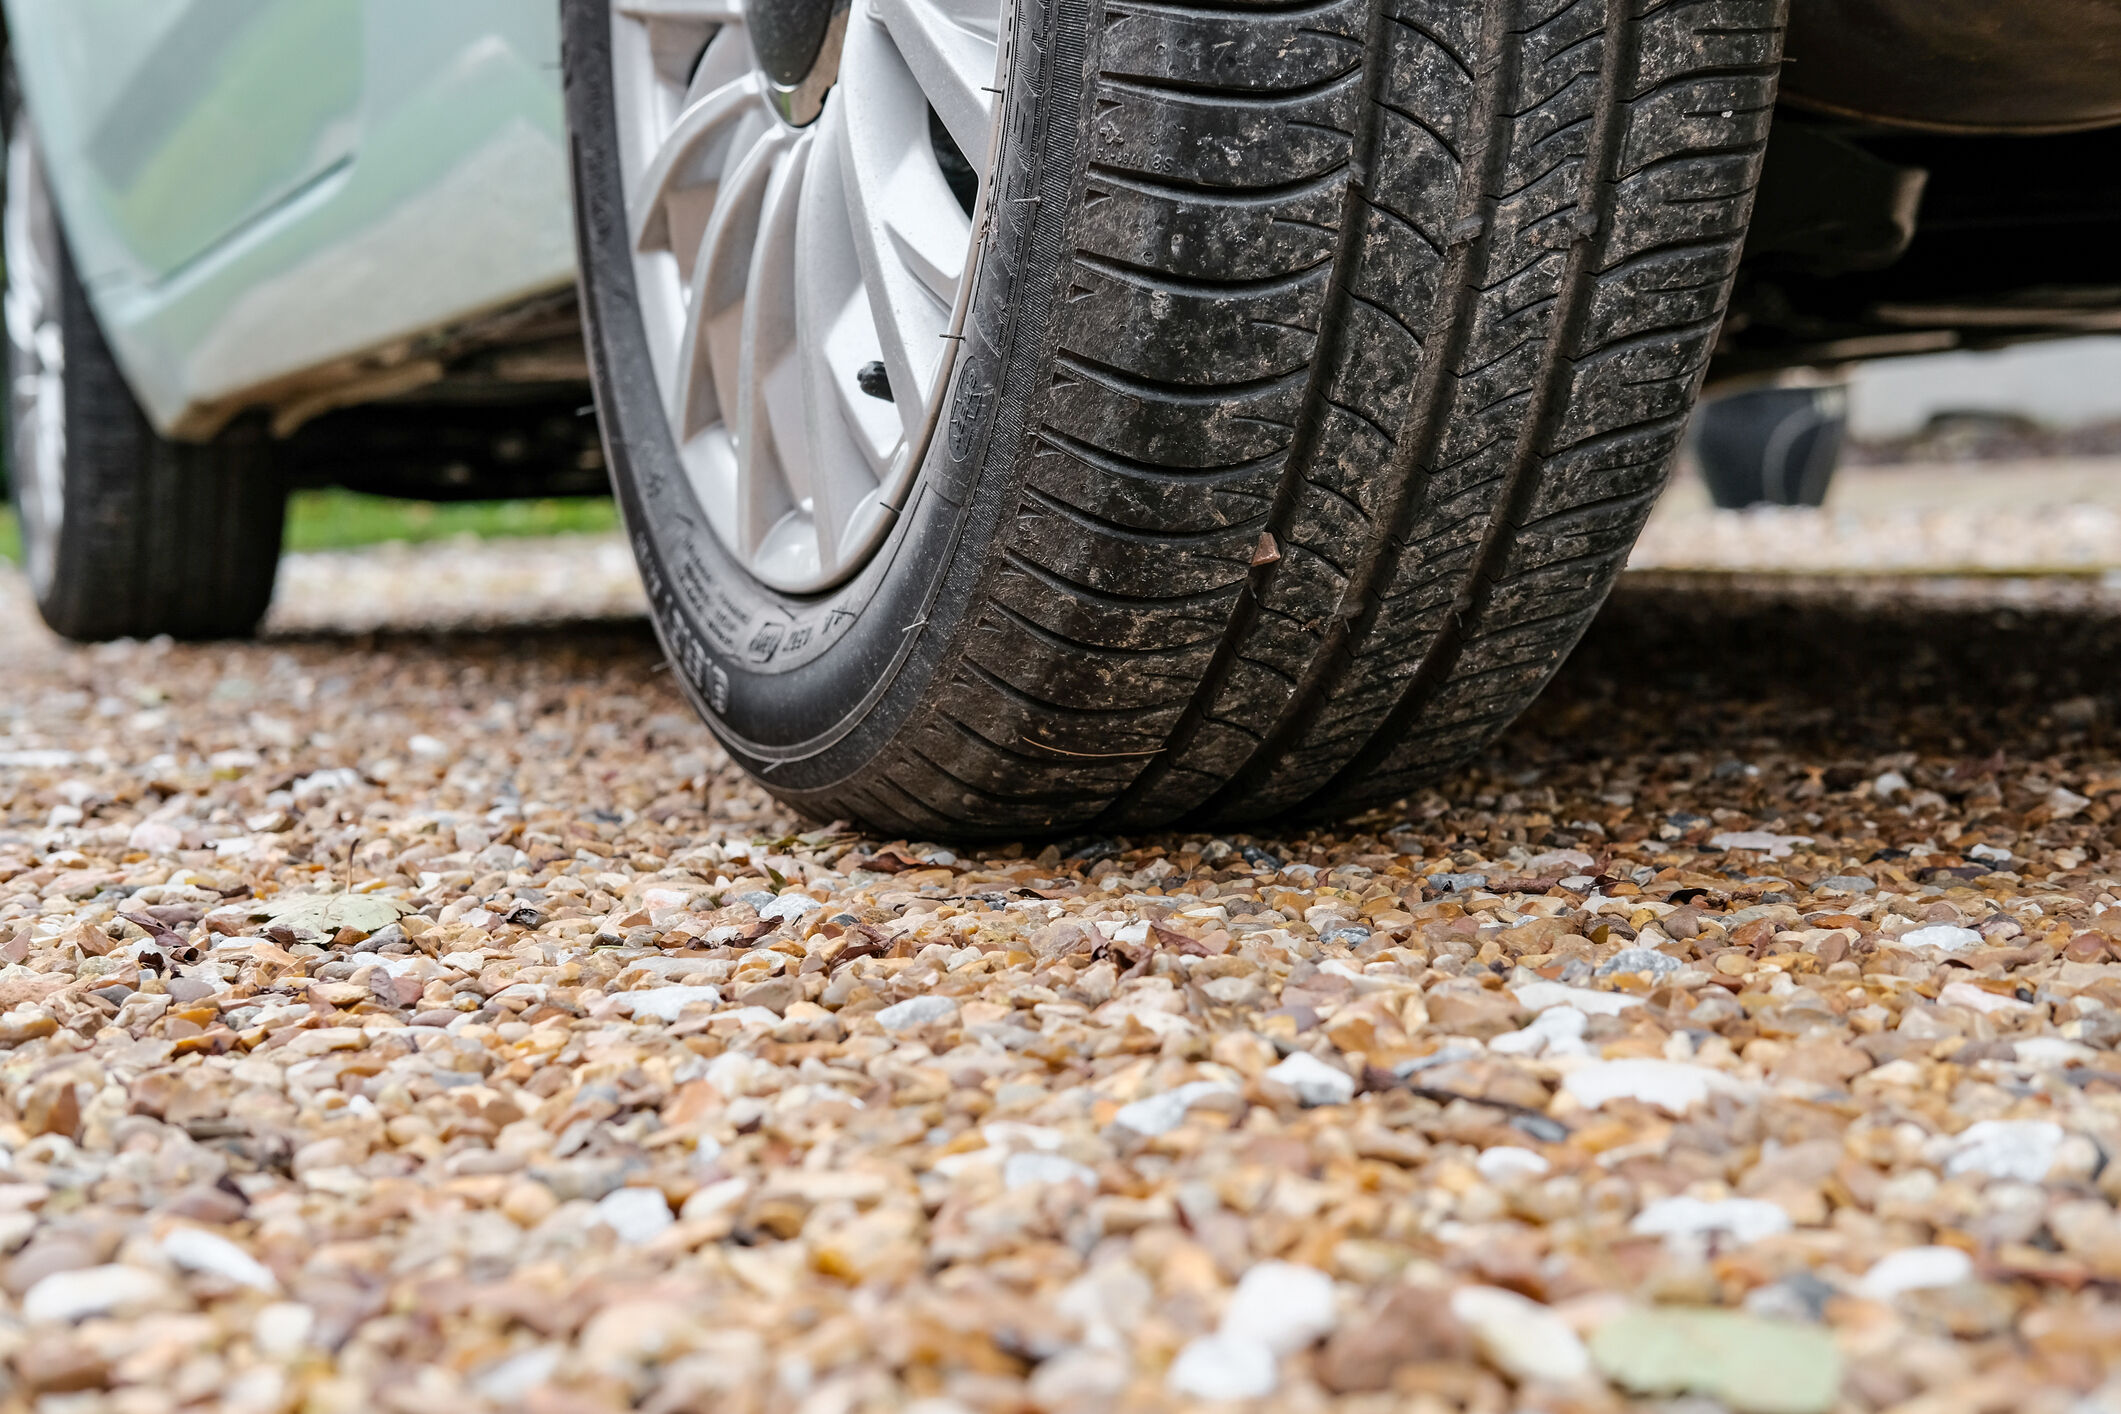 DC police offer tips to stem recent rise in tire and rim thefts